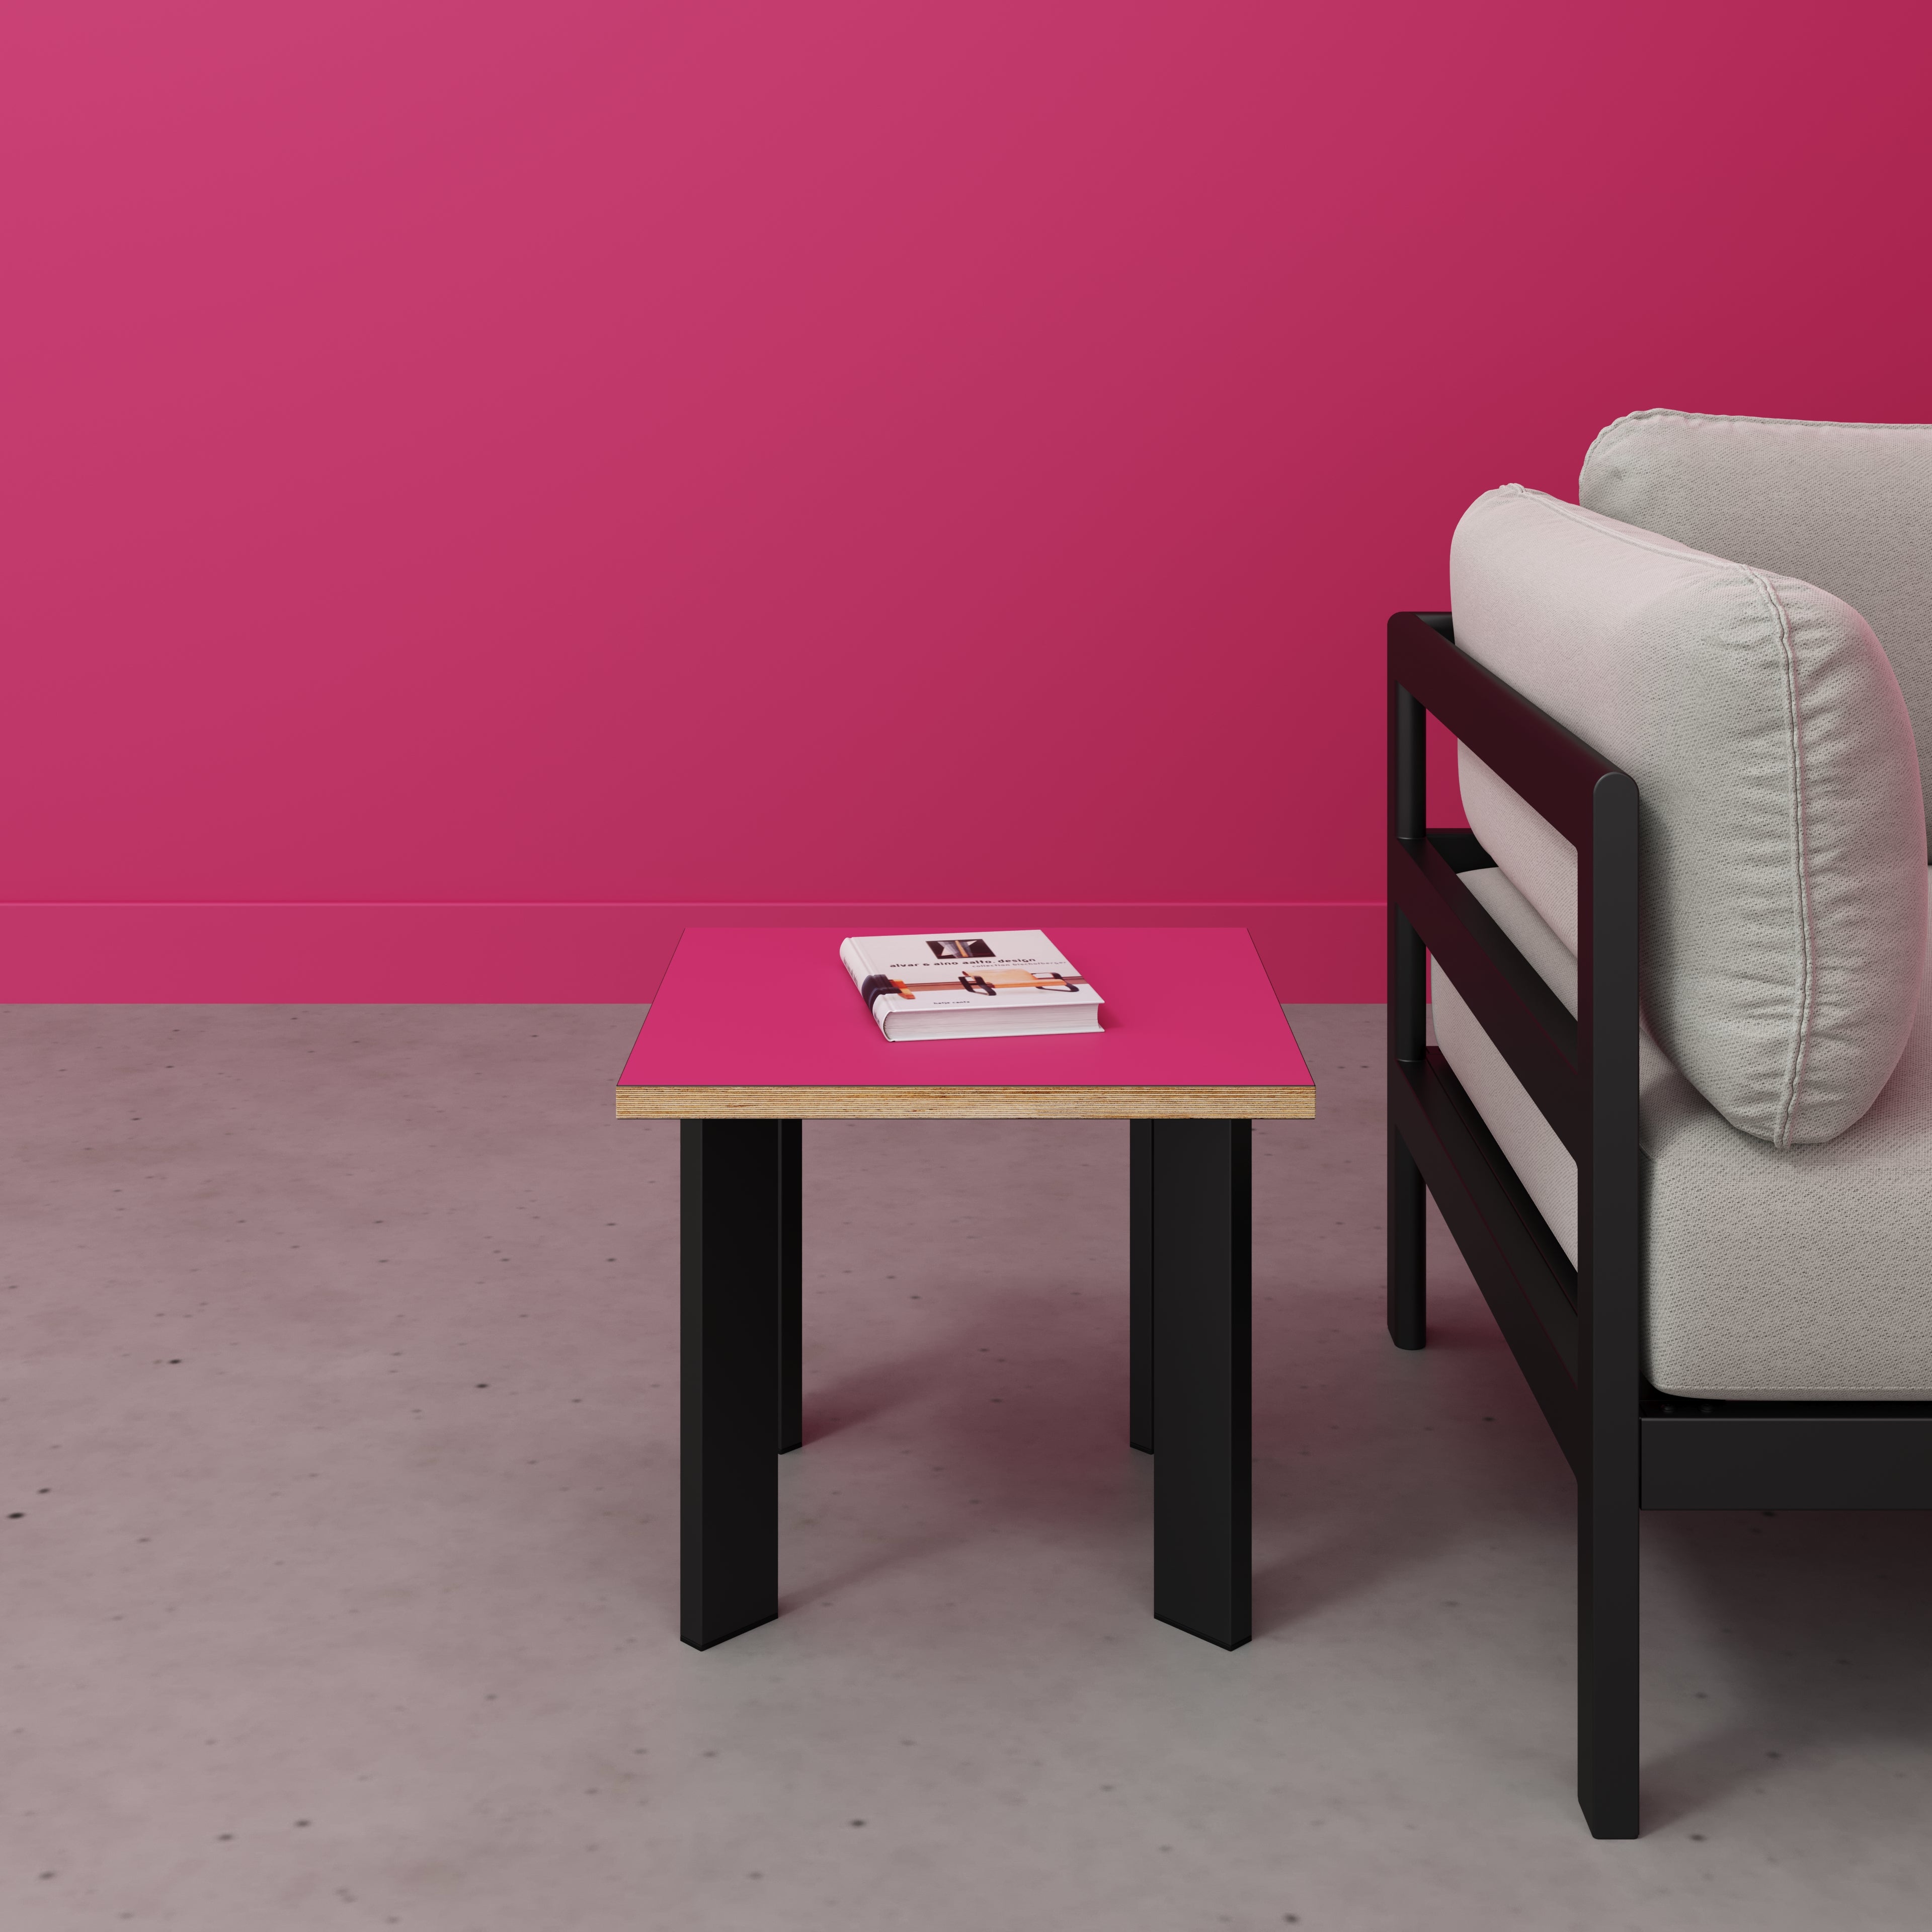 Side Table with Rectangular Single Pin Legs - Formica Juicy Pink - 500(w) x 500(d) x 425(h)